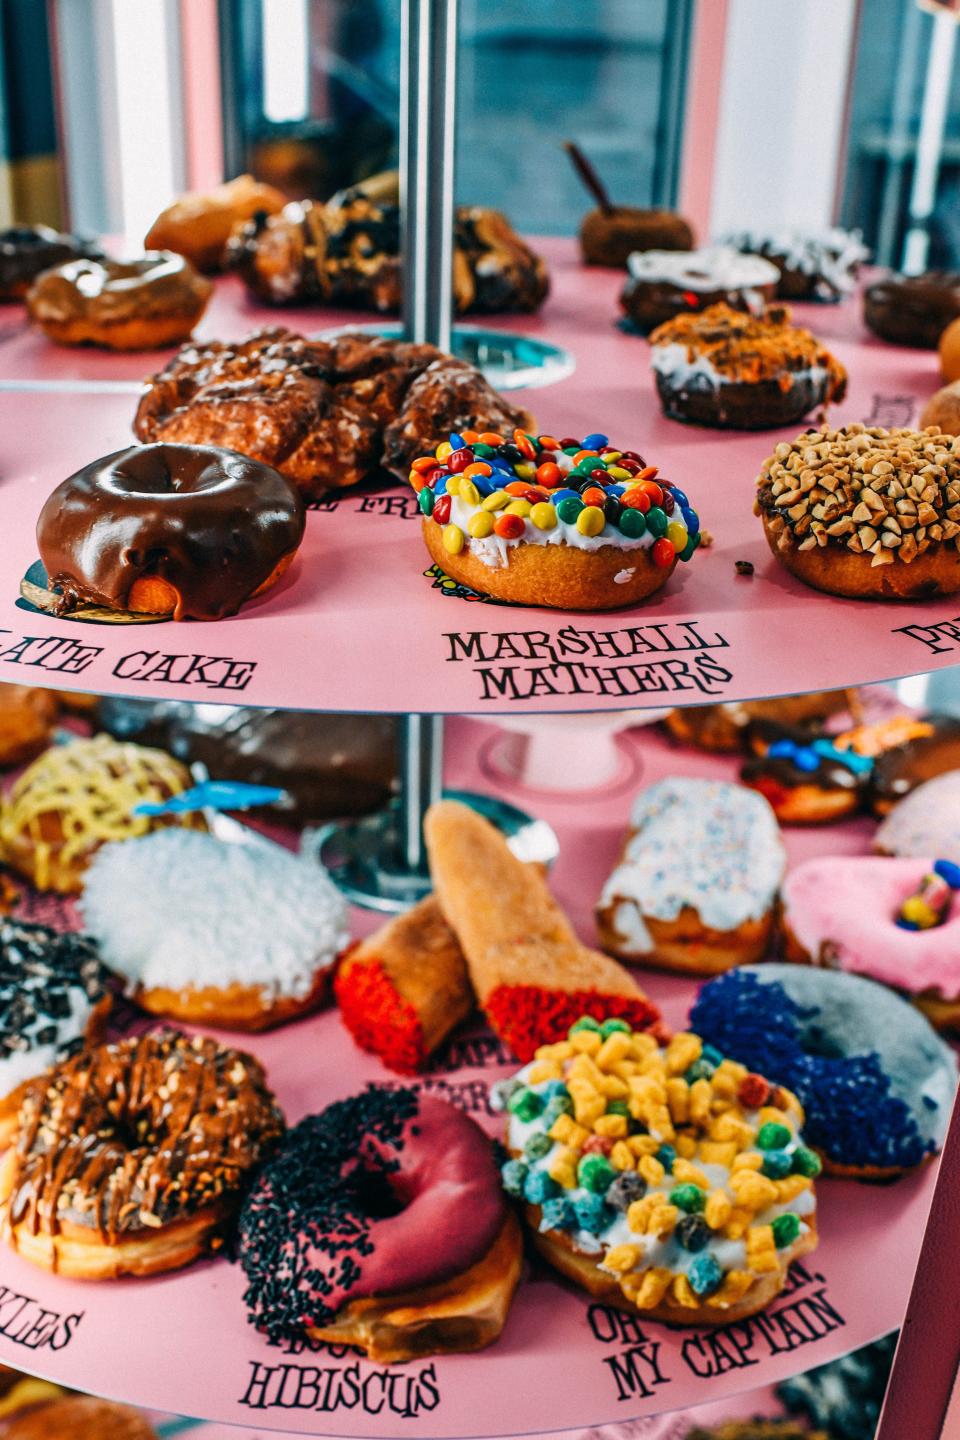 Voodoo Doughnut will come to BNA in September.